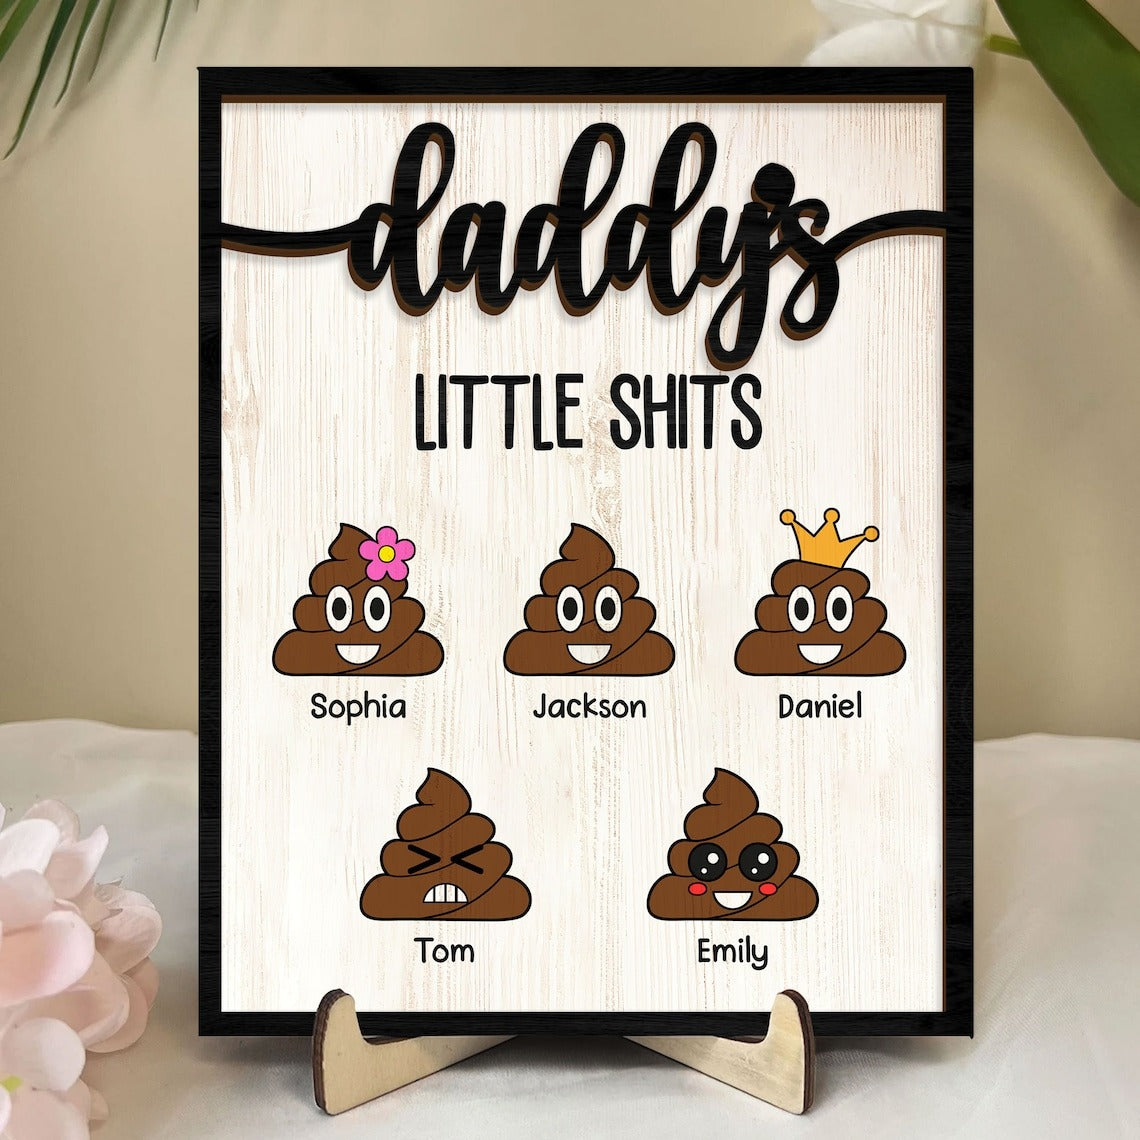 Personalized Daddy Wooden Plaque, Custom Kid's Name Wooden Sign, Daddy's Little Shits Wood Sign, Father's Day Gift for Dad, Grandpa, Him